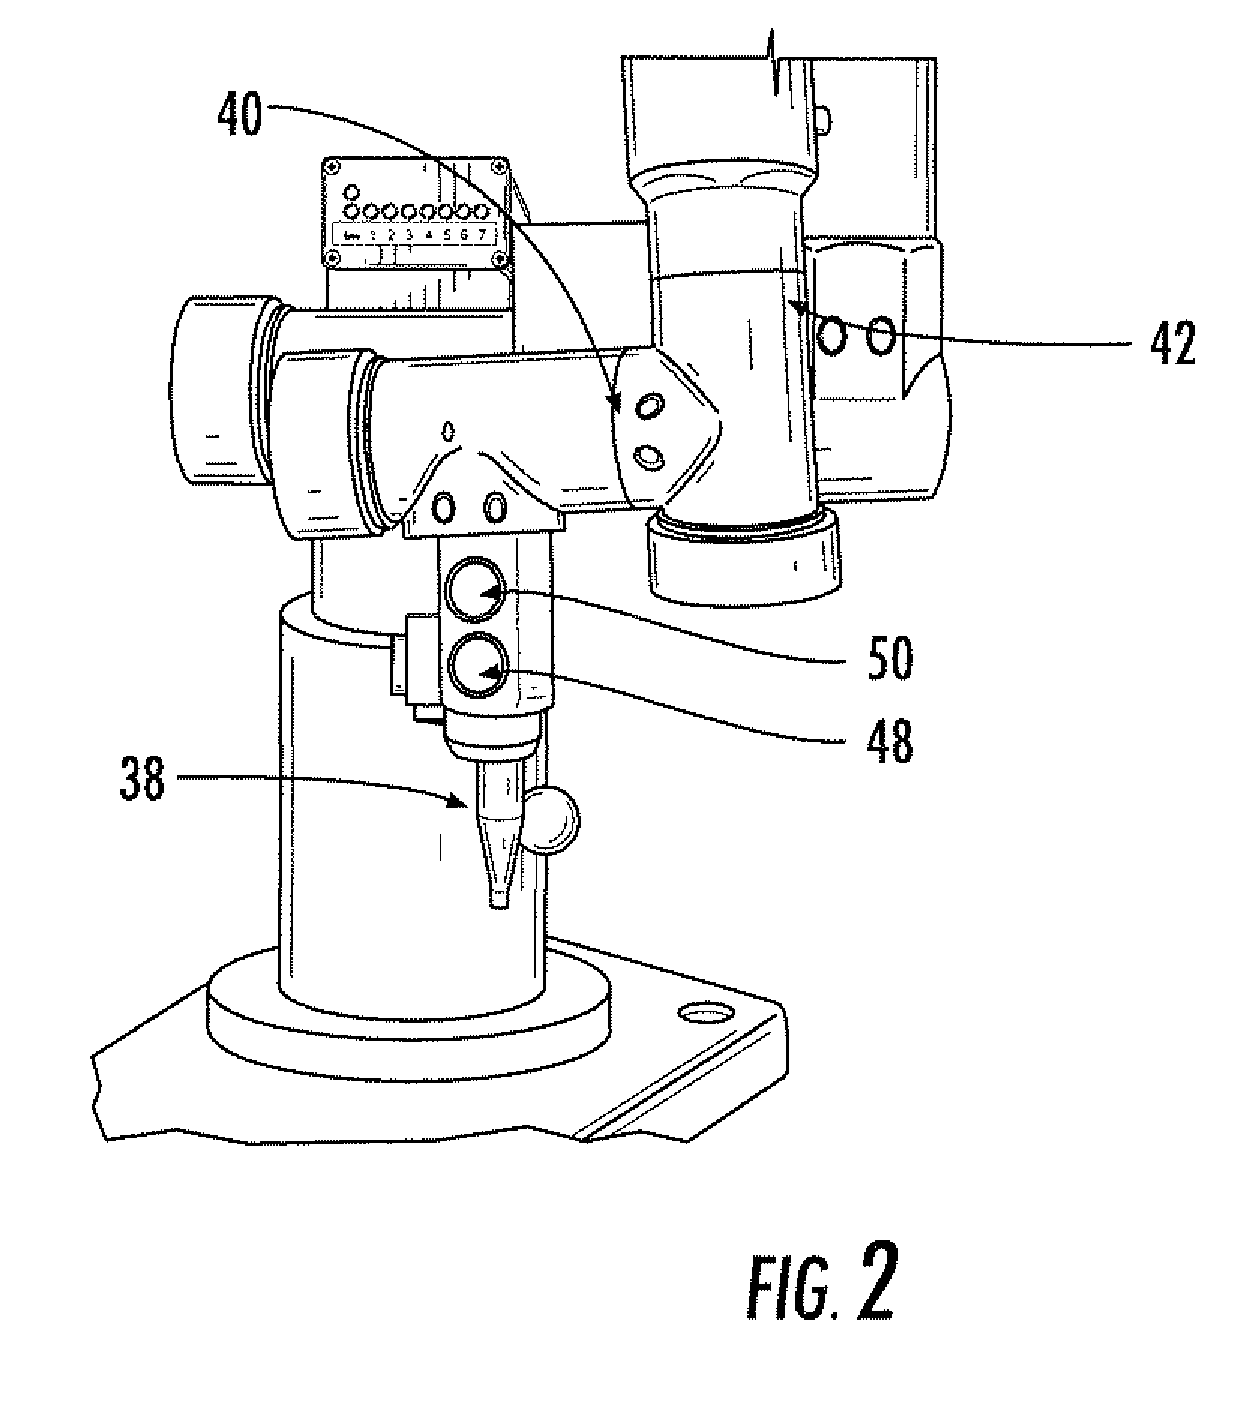 Device for measuring load and deflection of materials